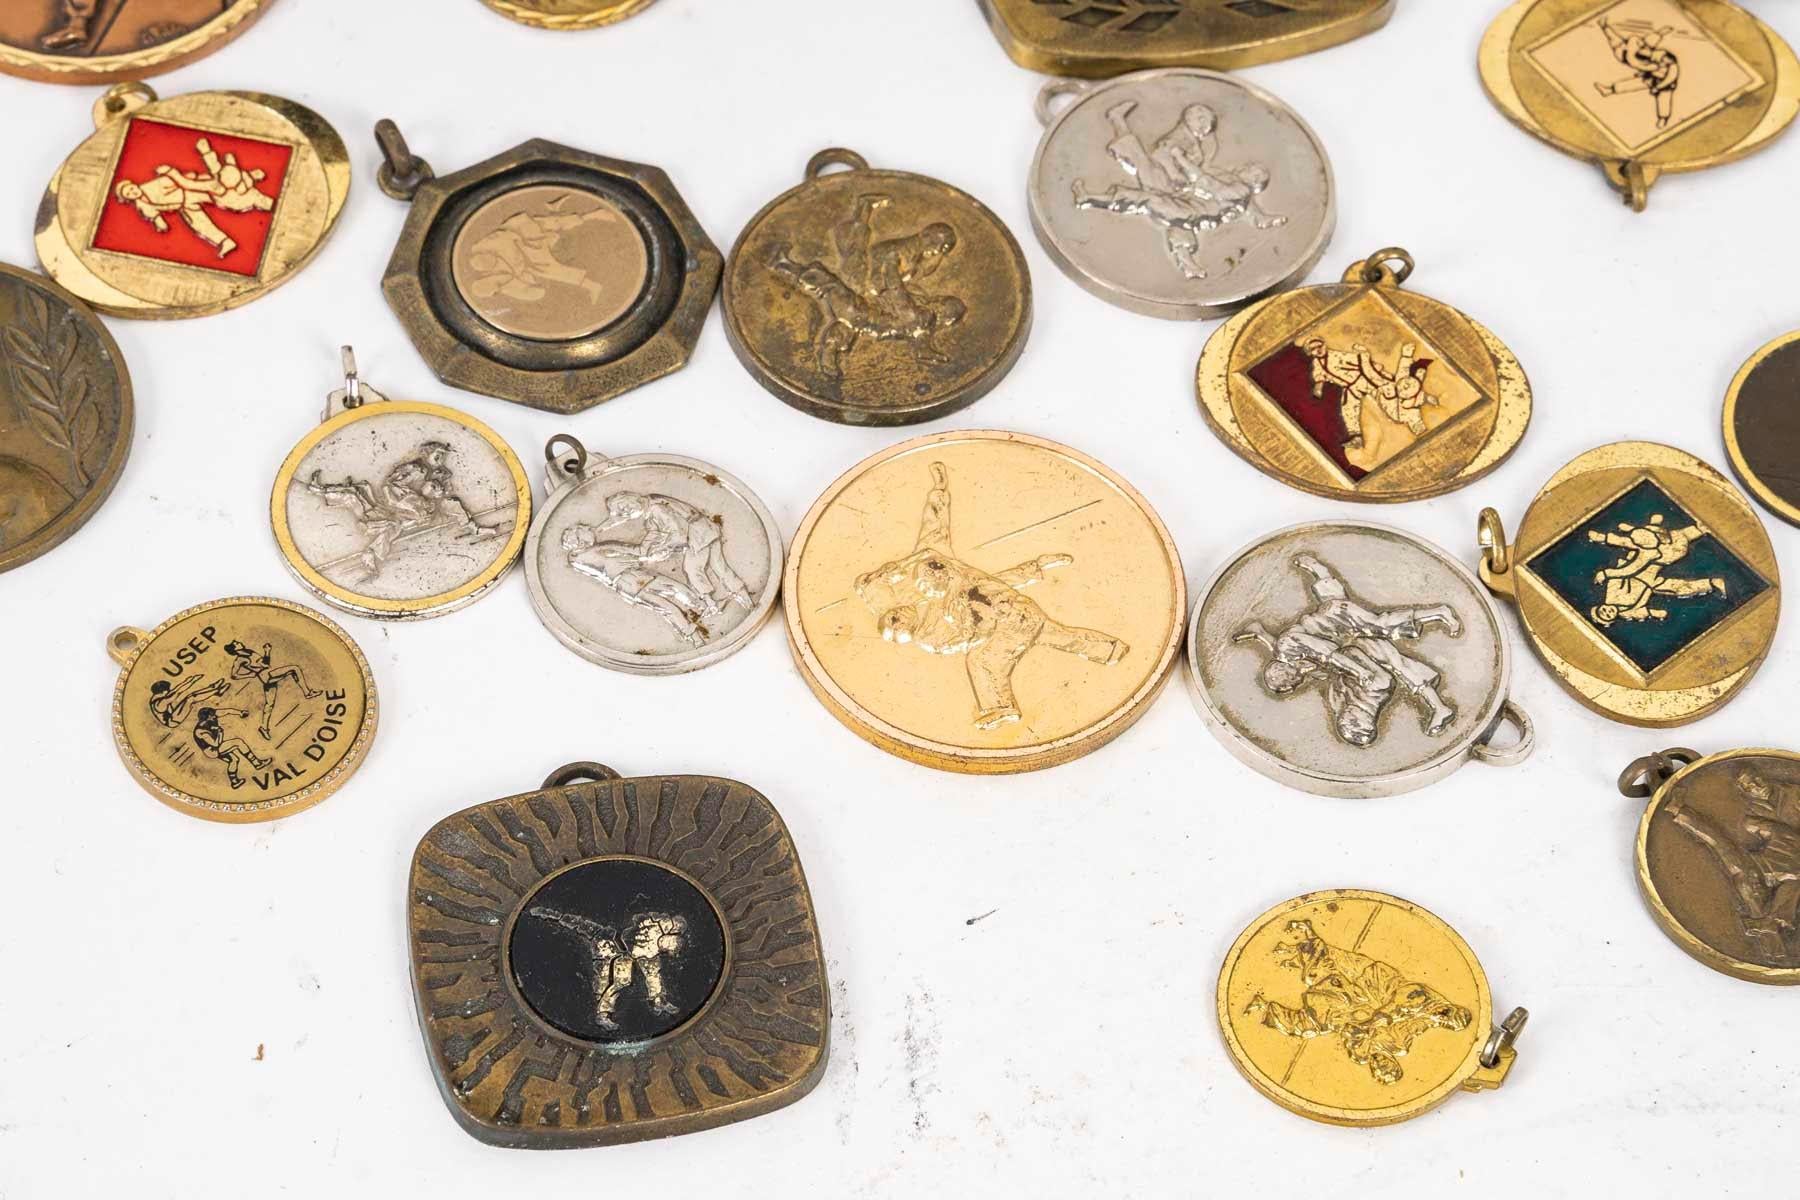 Set of 25 sports medals, 20th century.

Set of 25 medals from sporting competitions, including a small trophy, 1st Benjamin, 20th century.
Trophy: H: 13cm, W: 9cm, D: 5cm